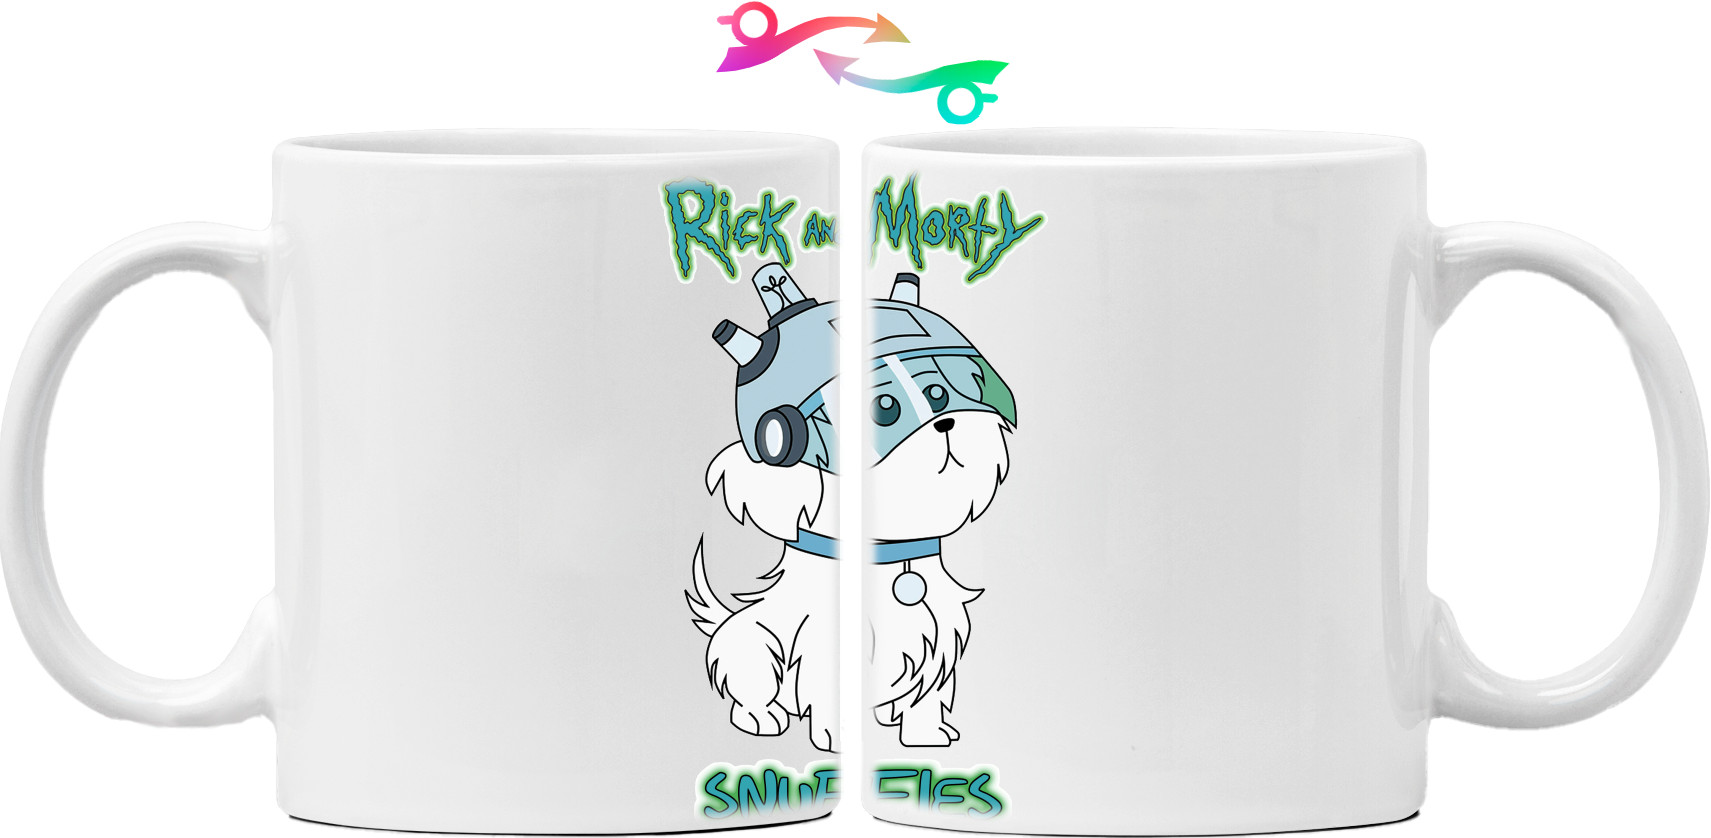 Rick-and-Morty-Snuffles